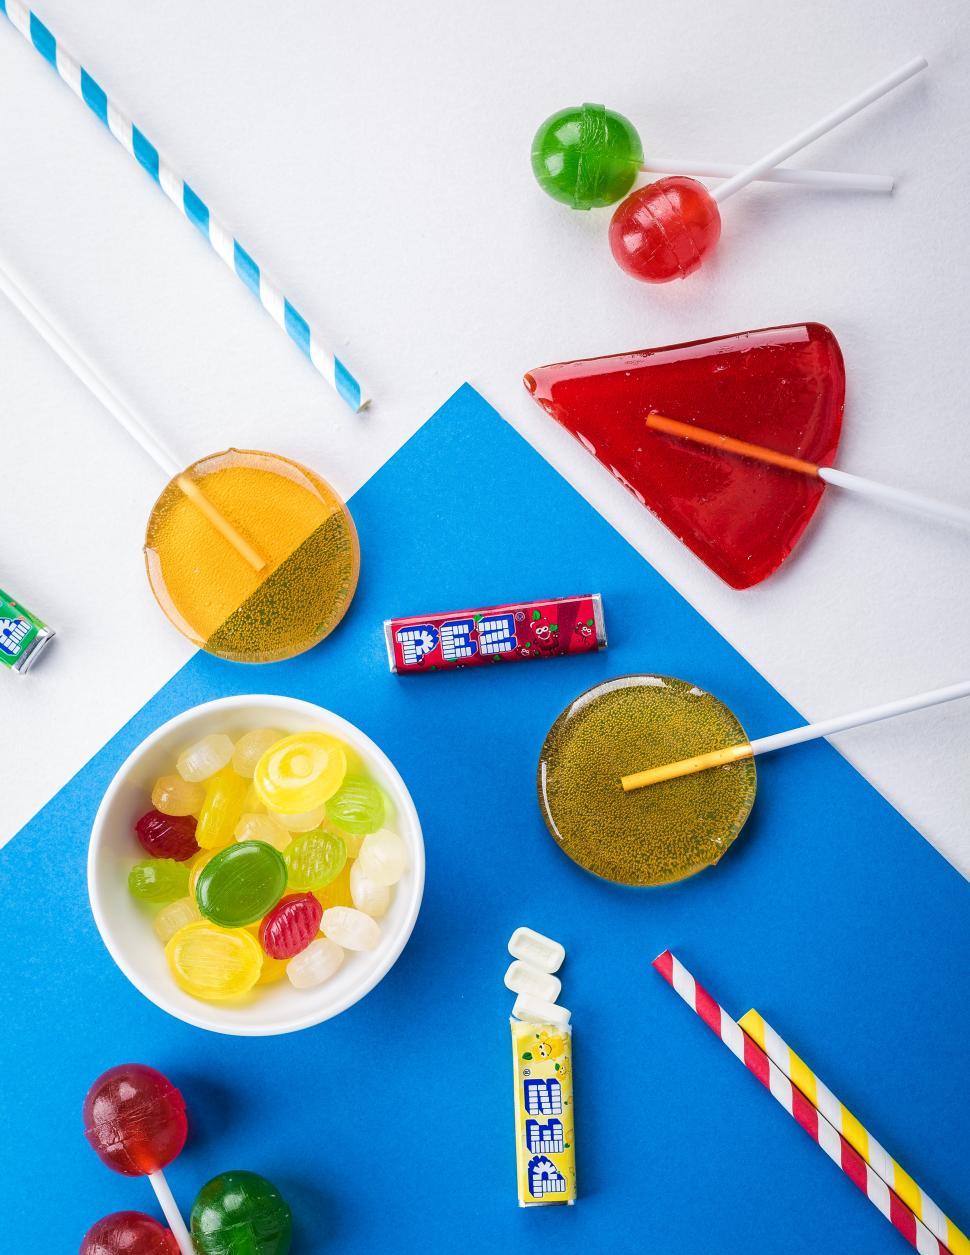 Free Image of Lollipops and Candies 